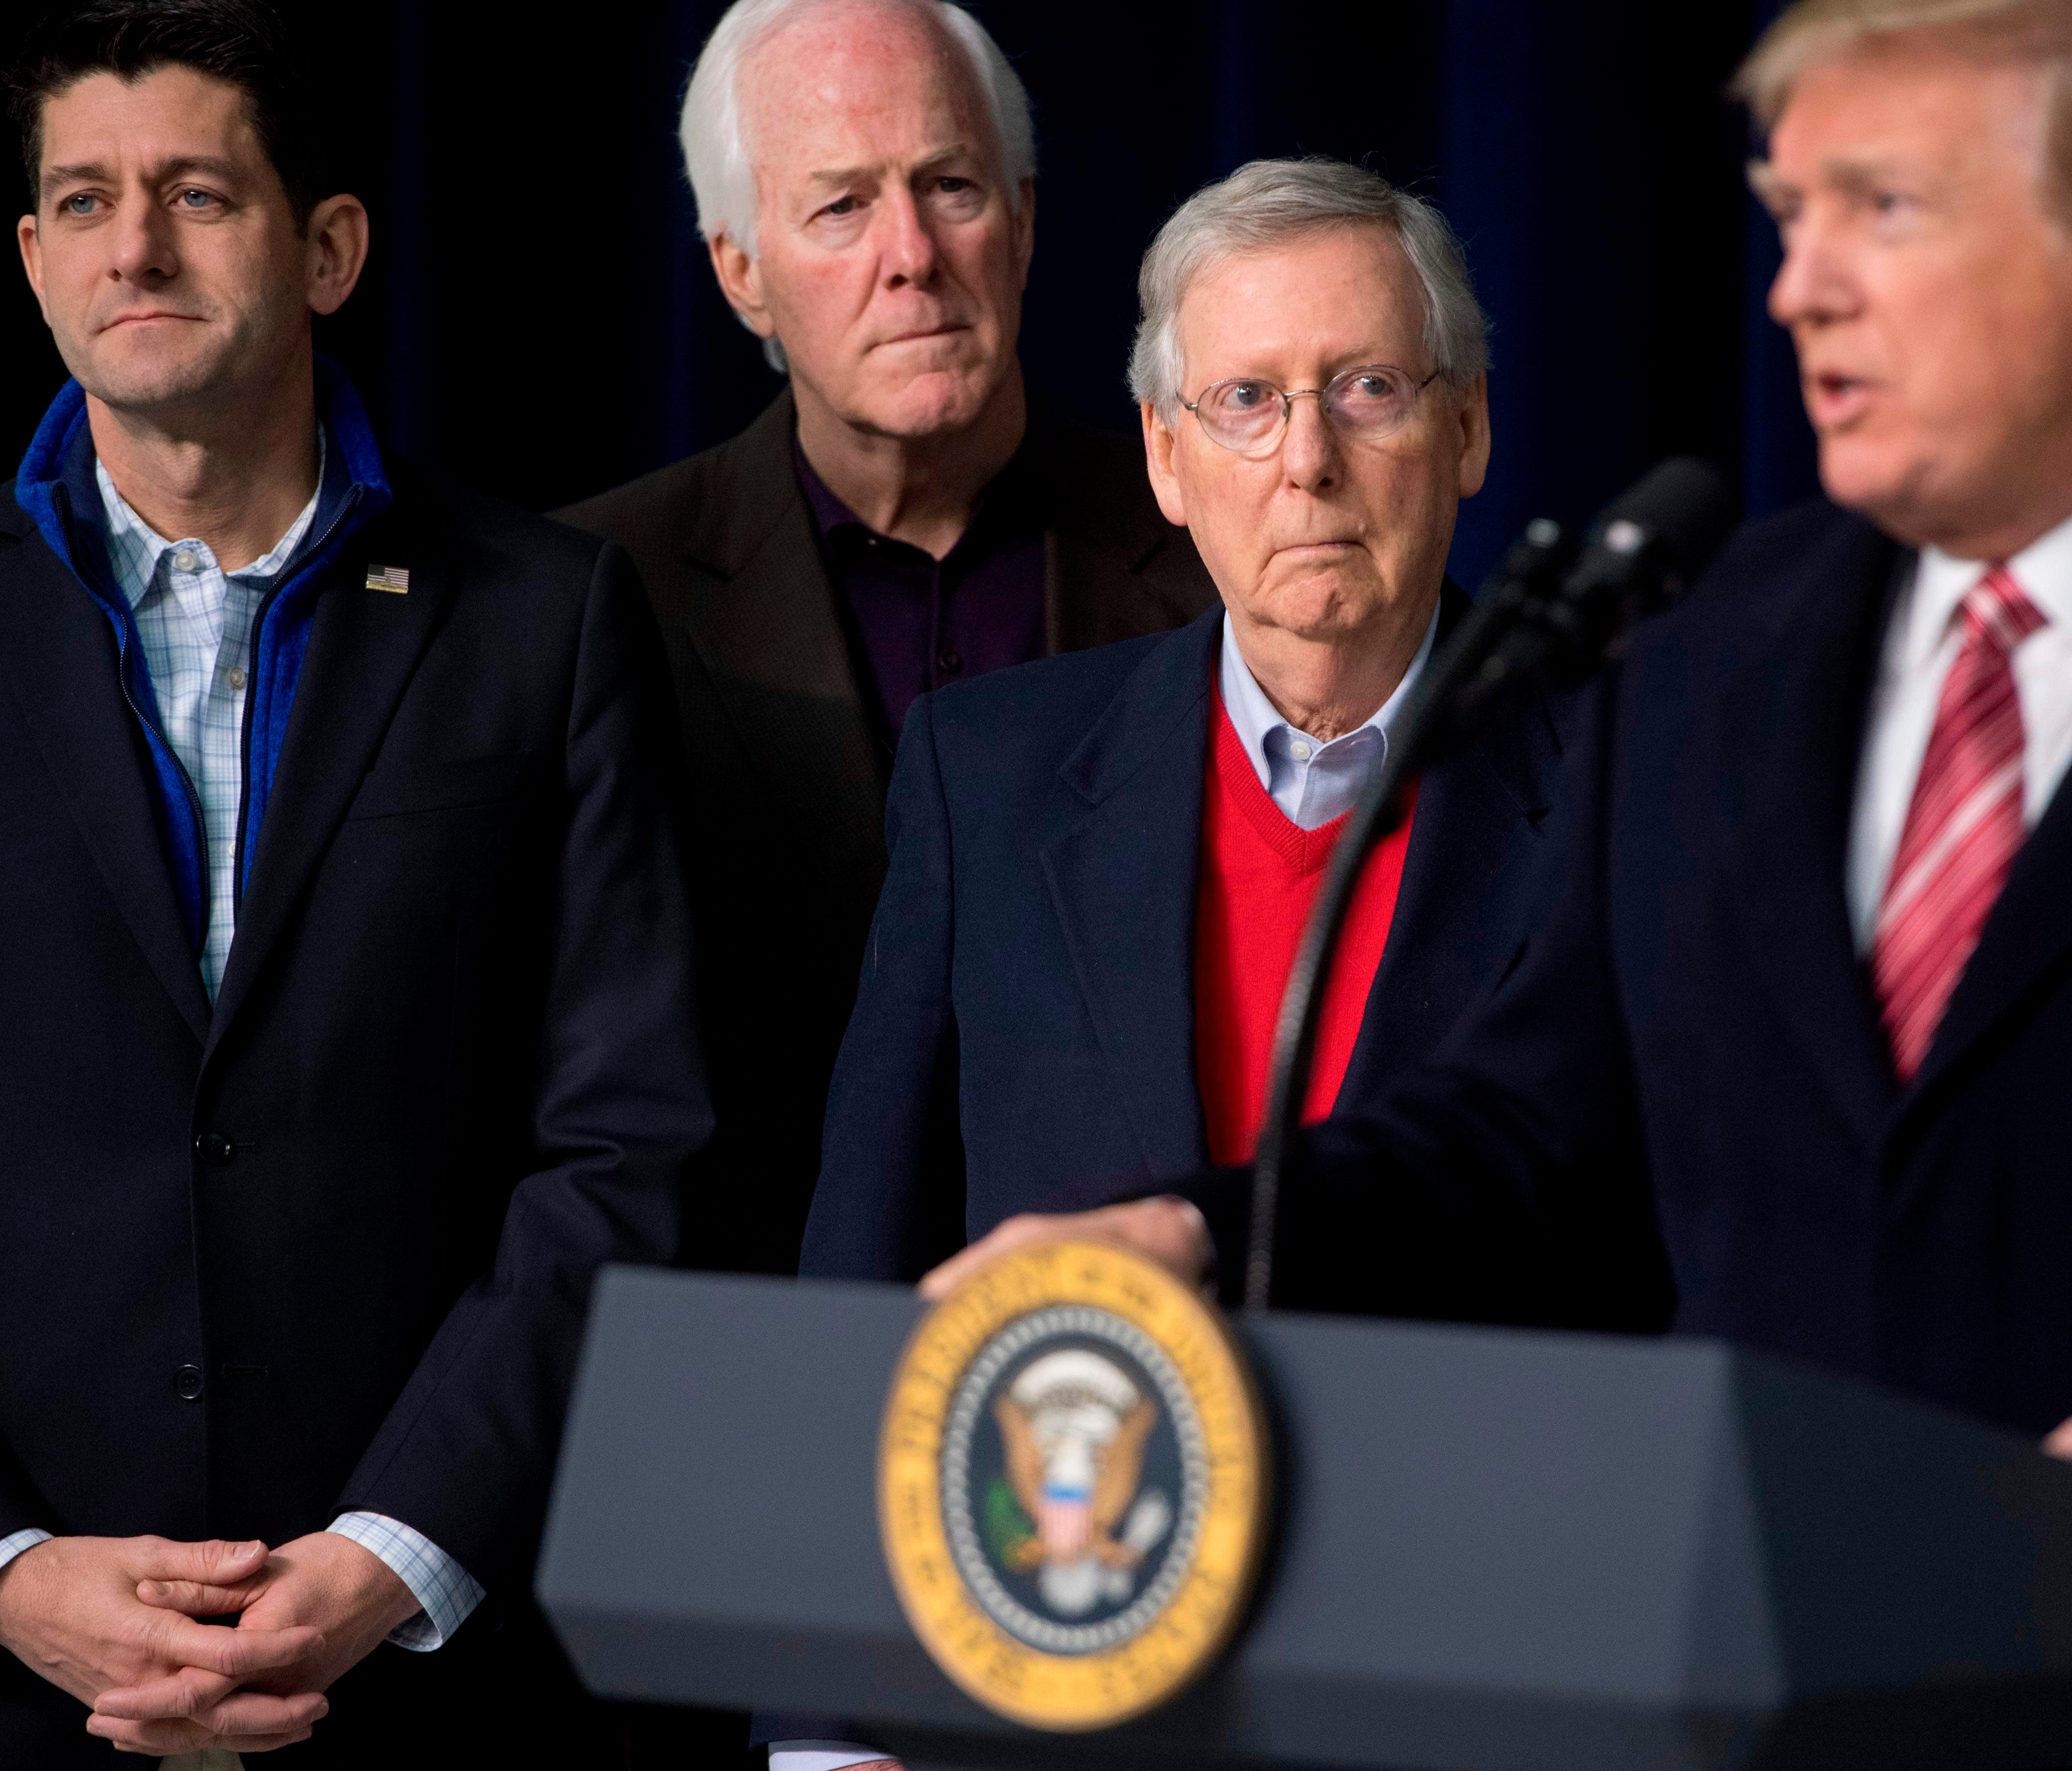 US President Donald Trump speaks alongside Speaker of the House Paul Ryan, R-Wis., (L), Senate Majority Whip John Cornyn, R-Texas, (2nd L) and Senate Majority Leader Mitch McConnell, R-Ky., (C) during a retreat with Republican lawmakers and members o